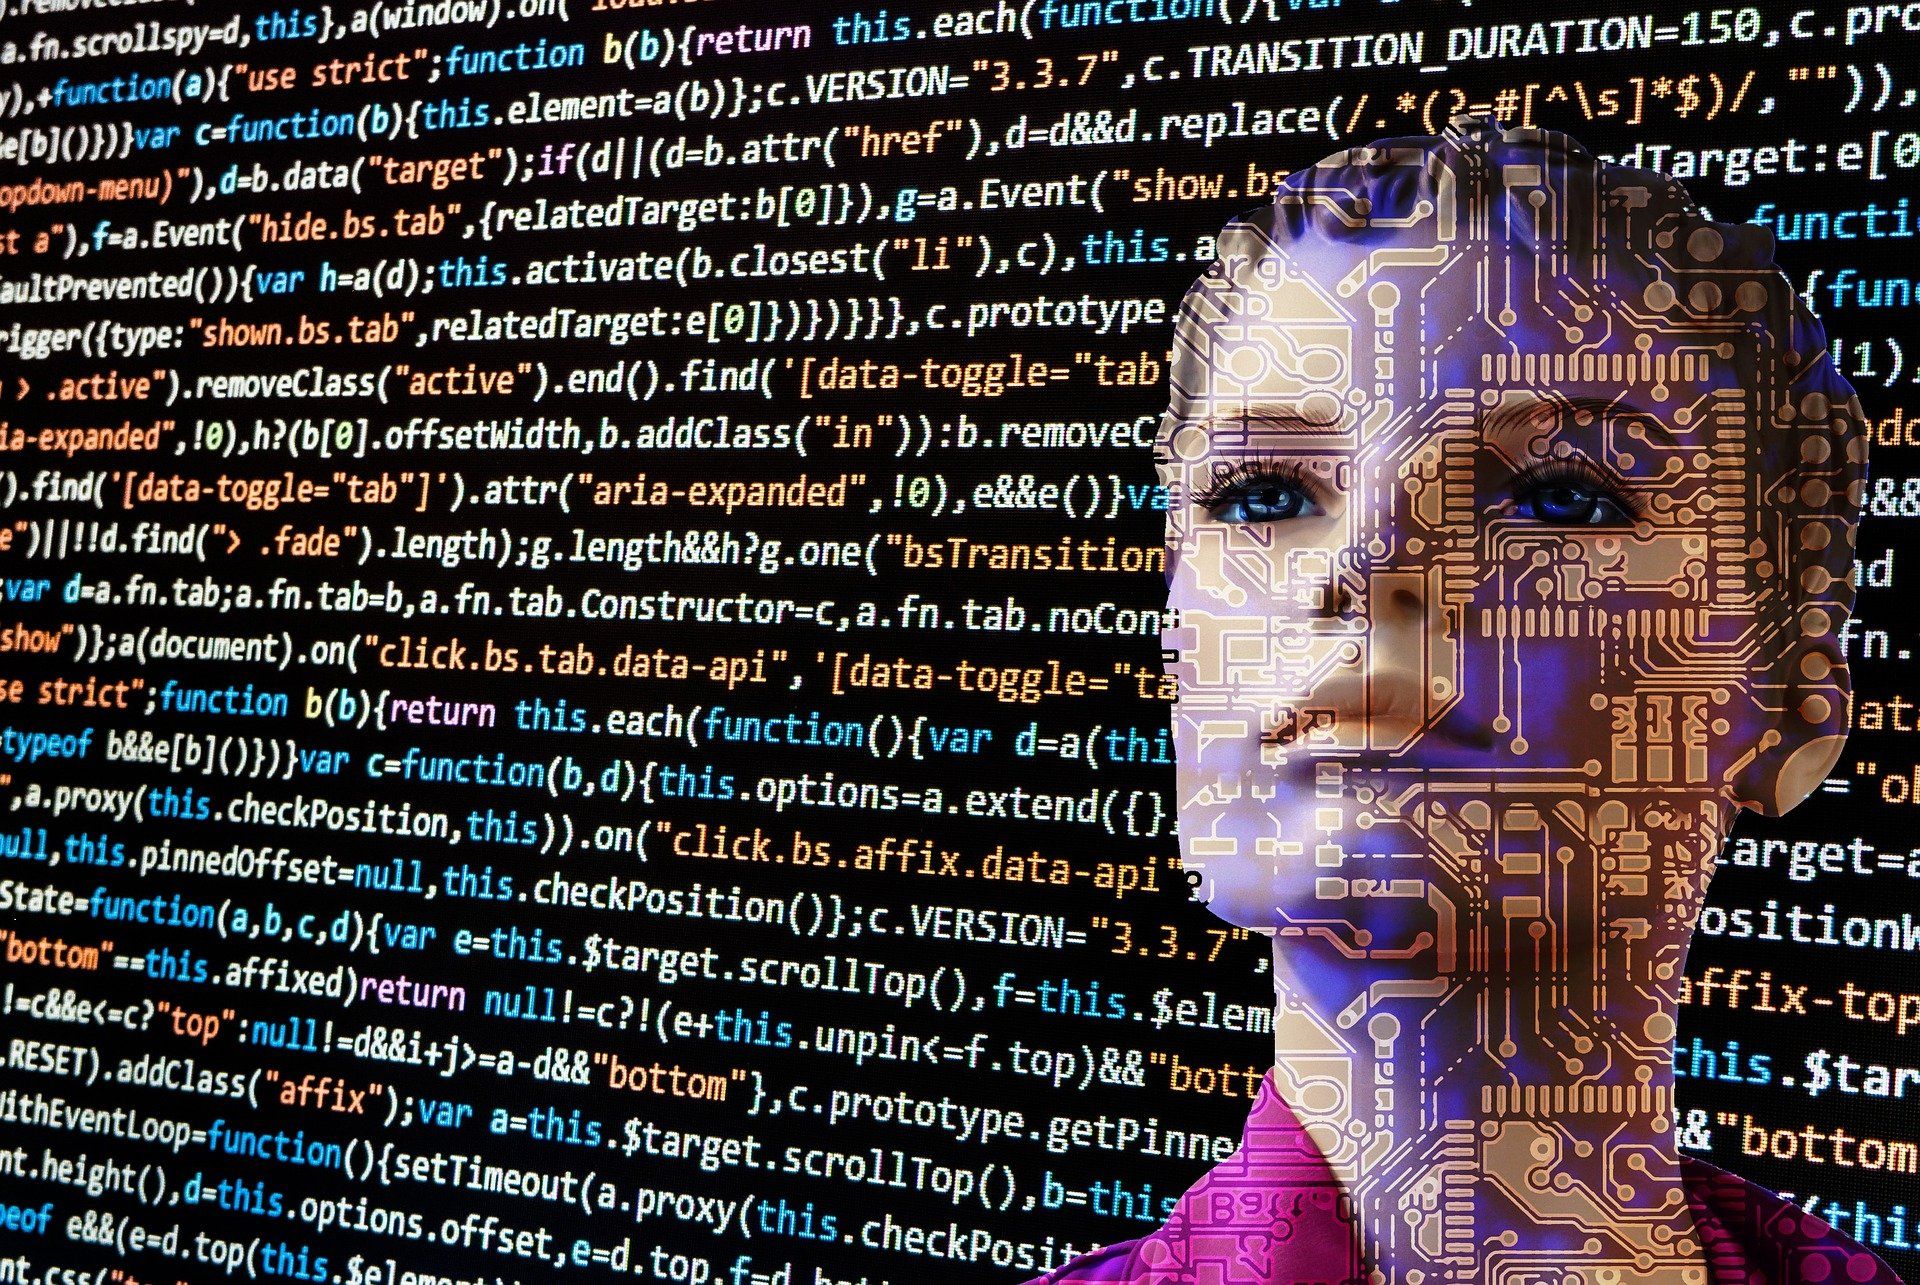 US ‘dangerously’ behind in AI technology: Commission report